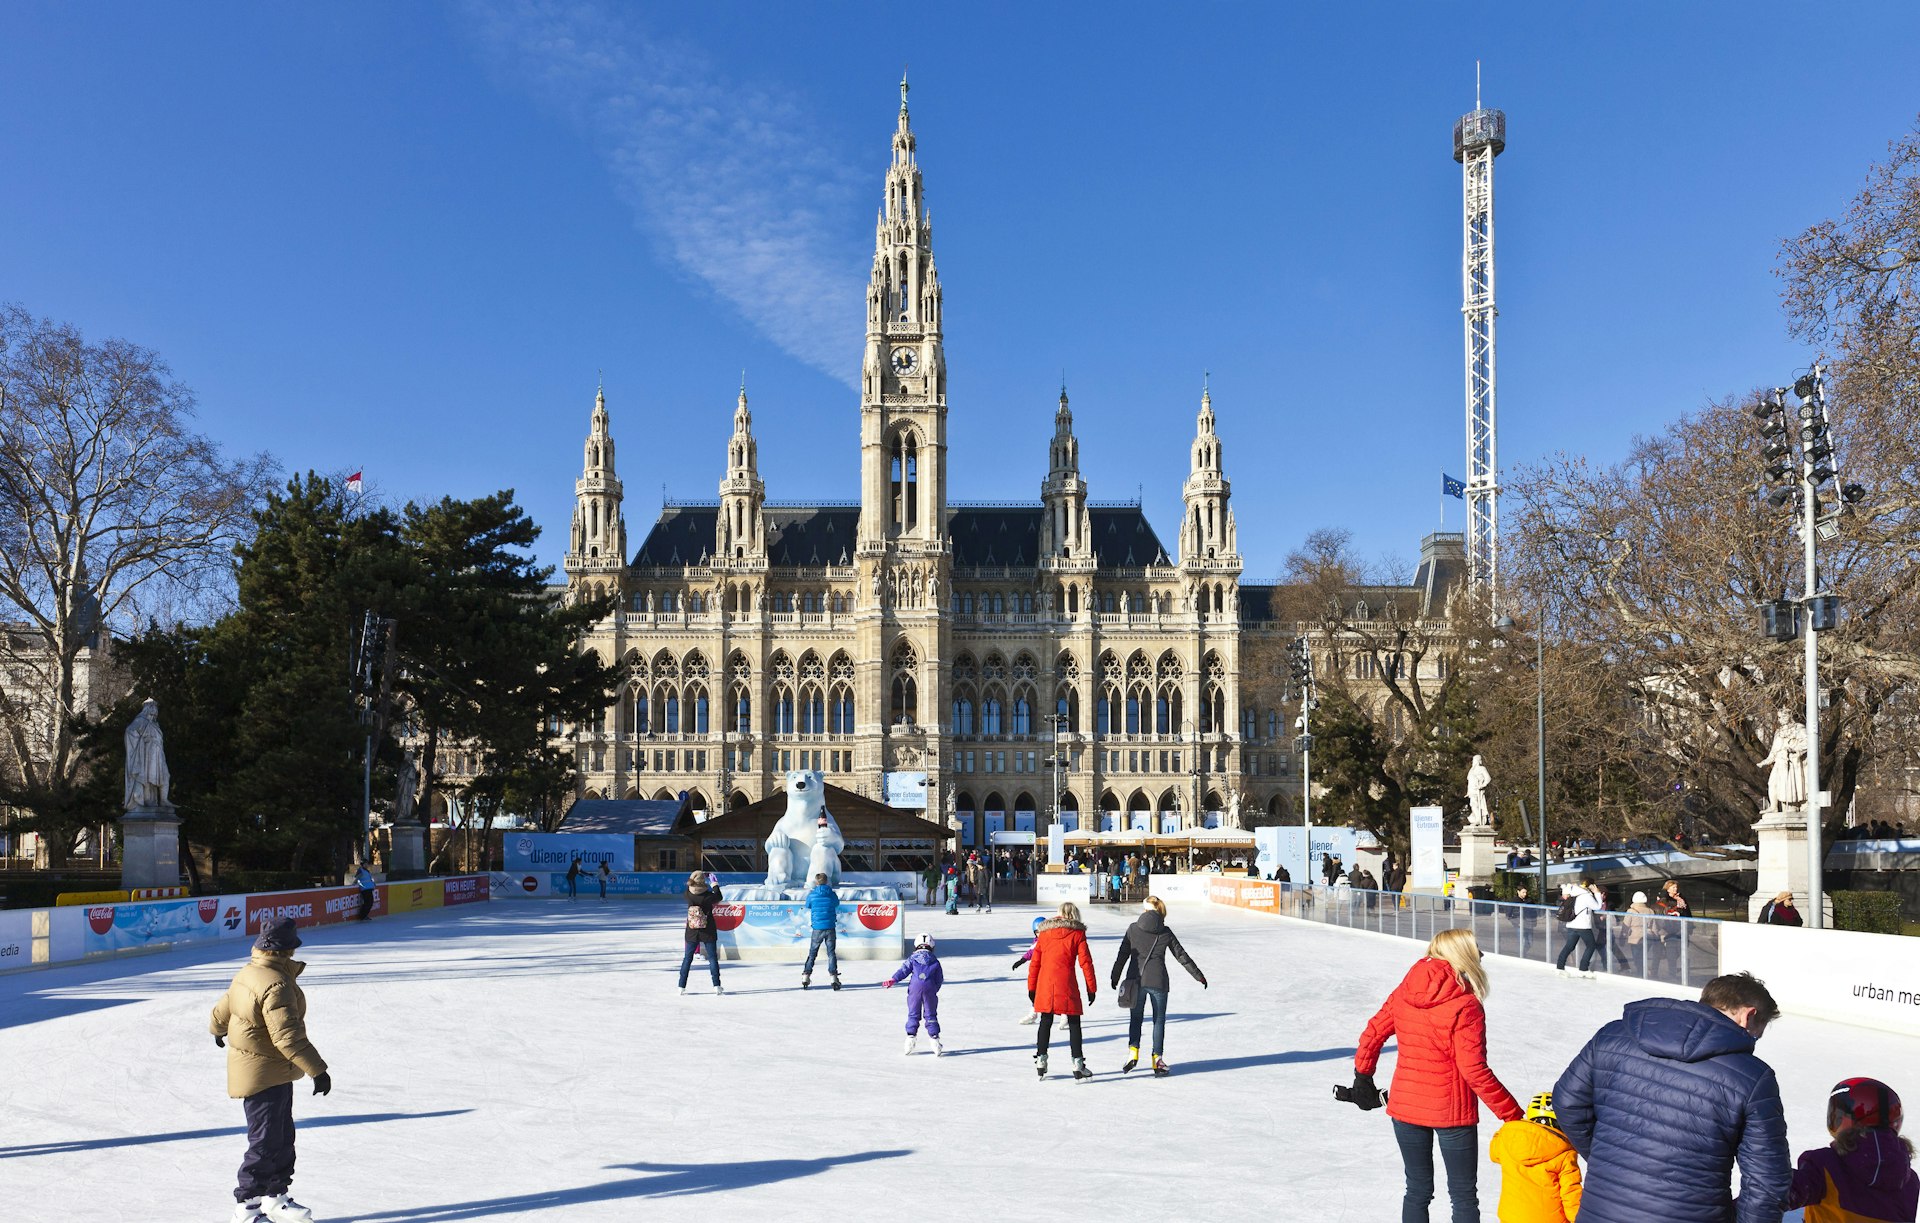 Families in the snow in Vienna